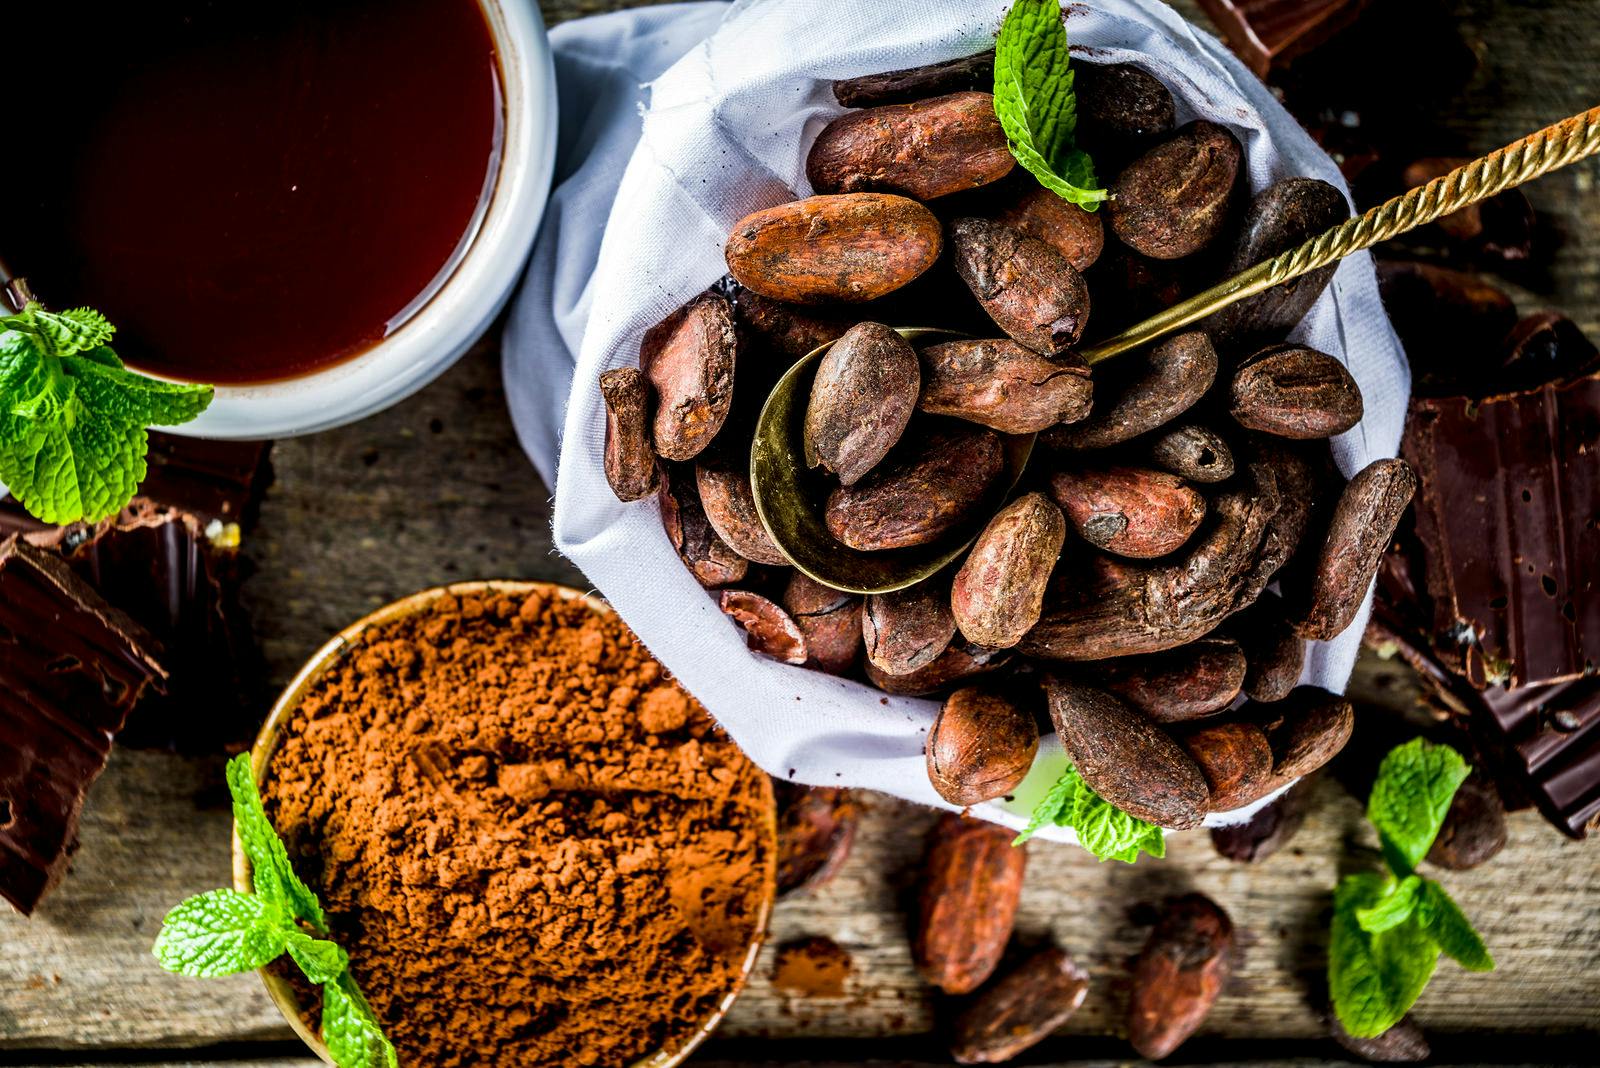 Different conditions of cocoa. Various cocoa &#8211; beans, beans, ground, crushed cocoa powder, chocolate paste, chocolate pieces and hot chocolate in a cup. On a wooden rustic background with copy space for text
